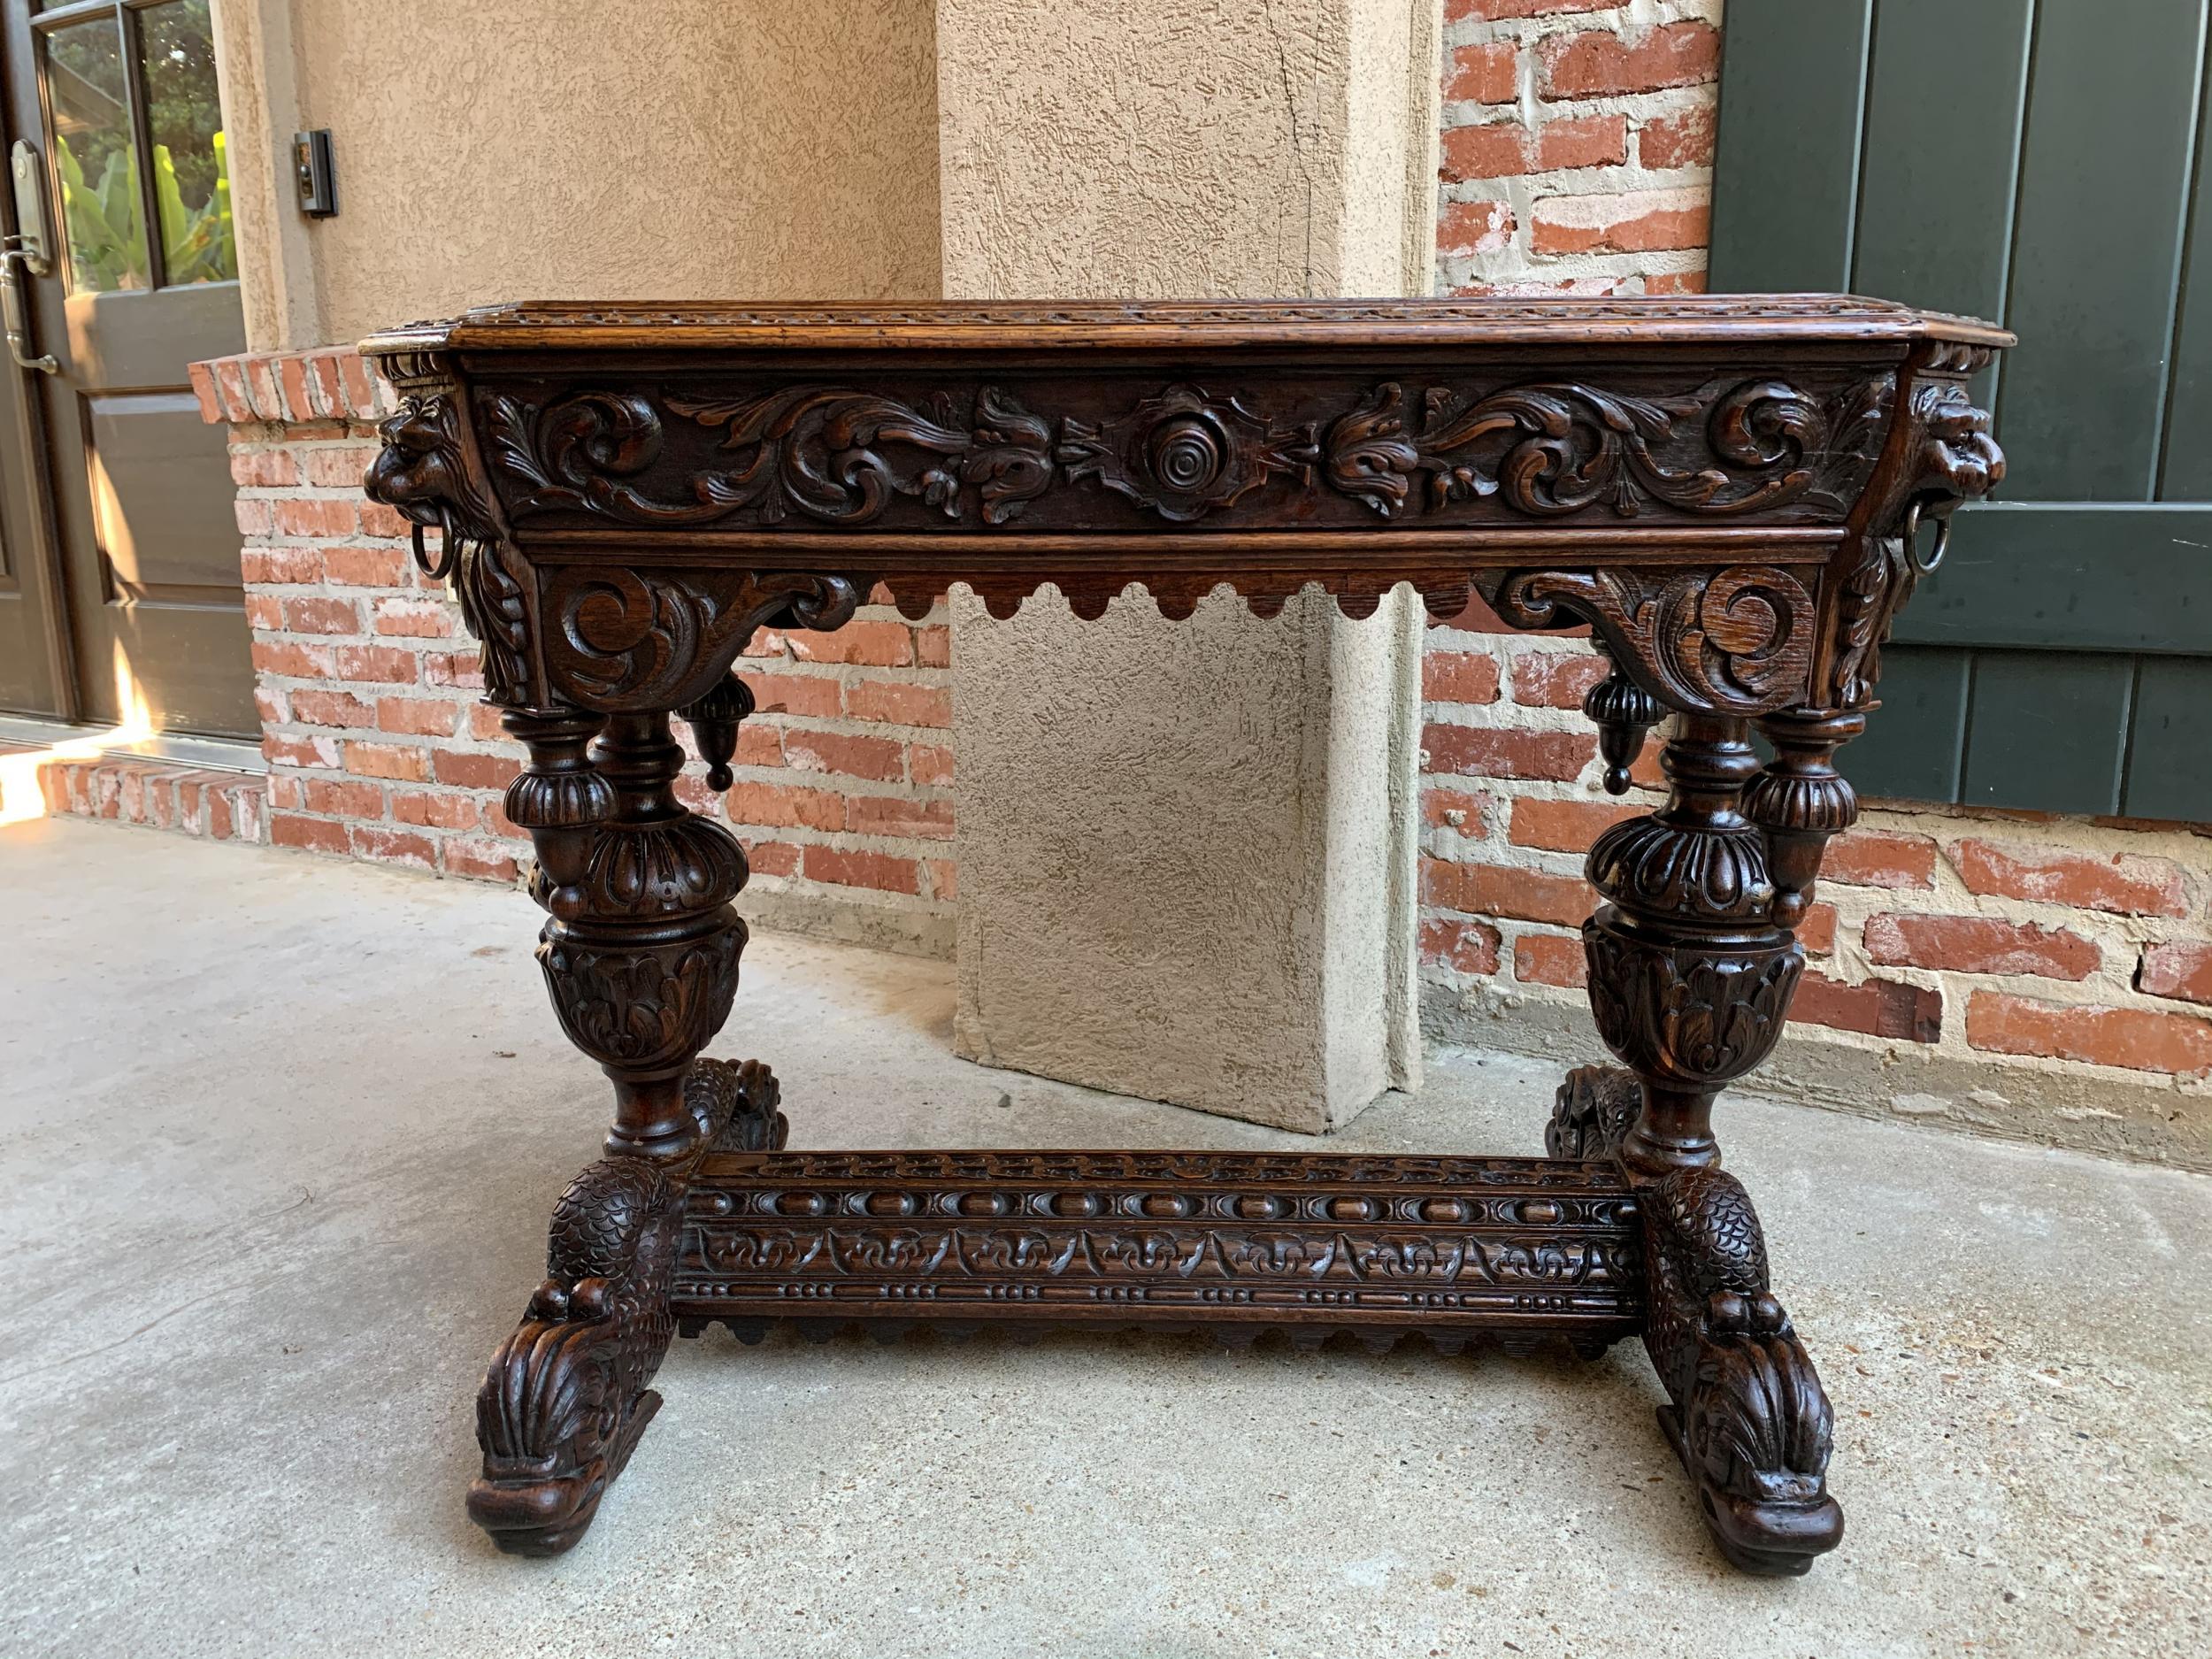 19th century Petite French carved oak dolphin table desk renaissance gothic

~Direct from France~
An elegant antique French carved library table or 